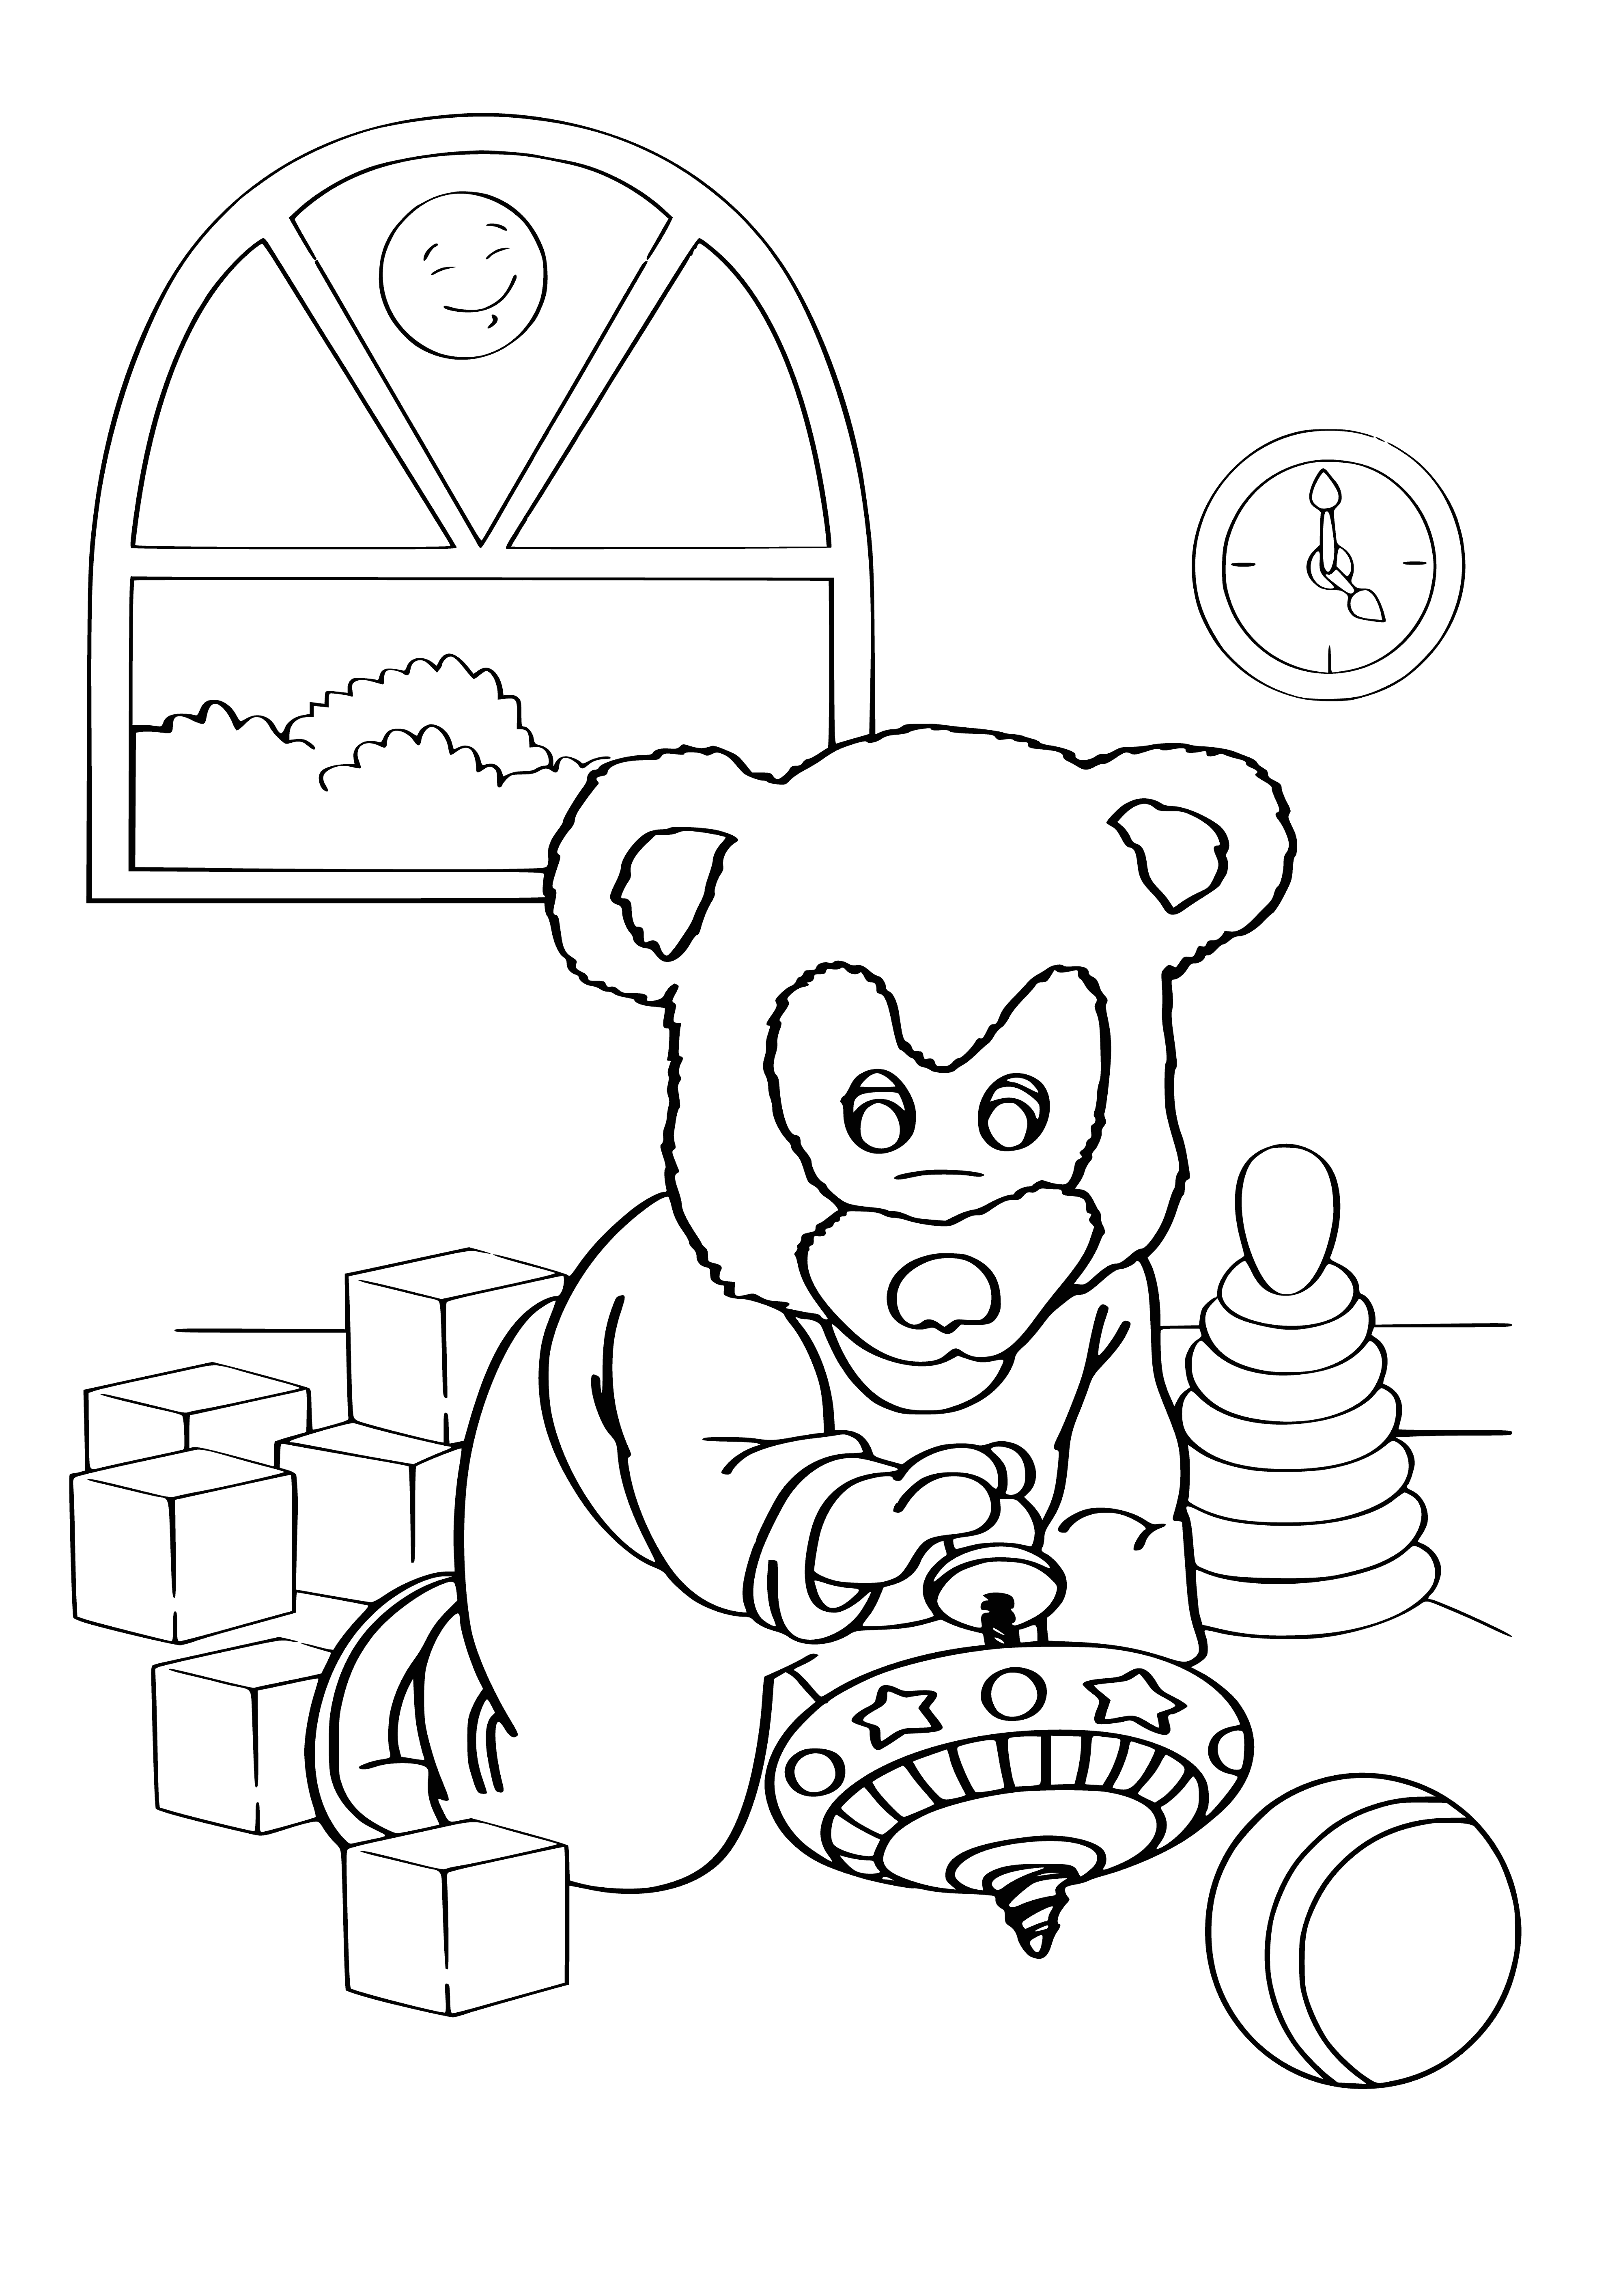 coloring page: Mishutka is a collection of four short stories, each with Mishutka and her animal friends going on an adventure. From bedtime stories to beach visits, to helping out a little rabbit, these stories are sure to bring joy to children.